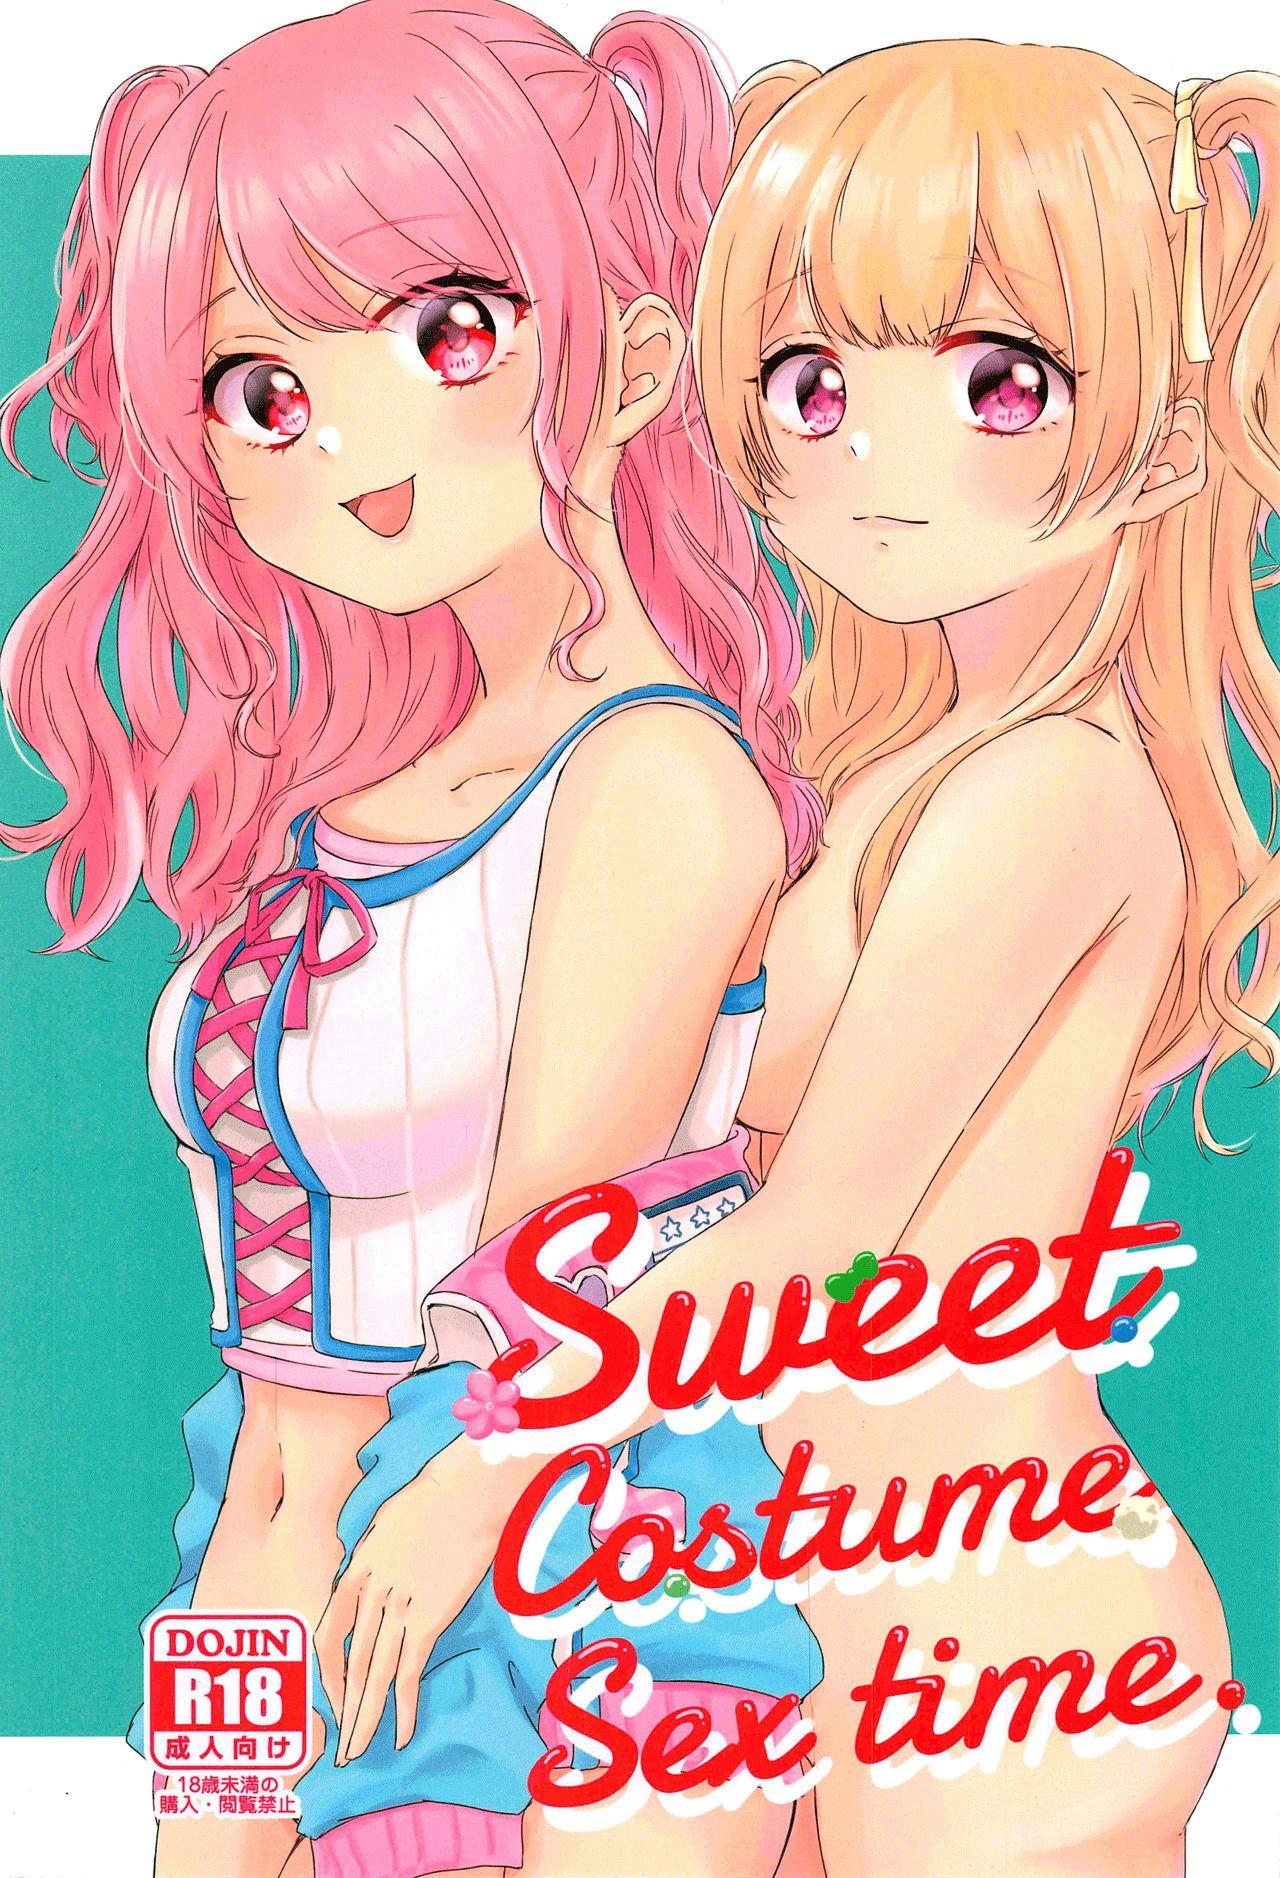 Rough Sweet Costume Sex time. - Bang dream Free Hard Core Porn - Page 2